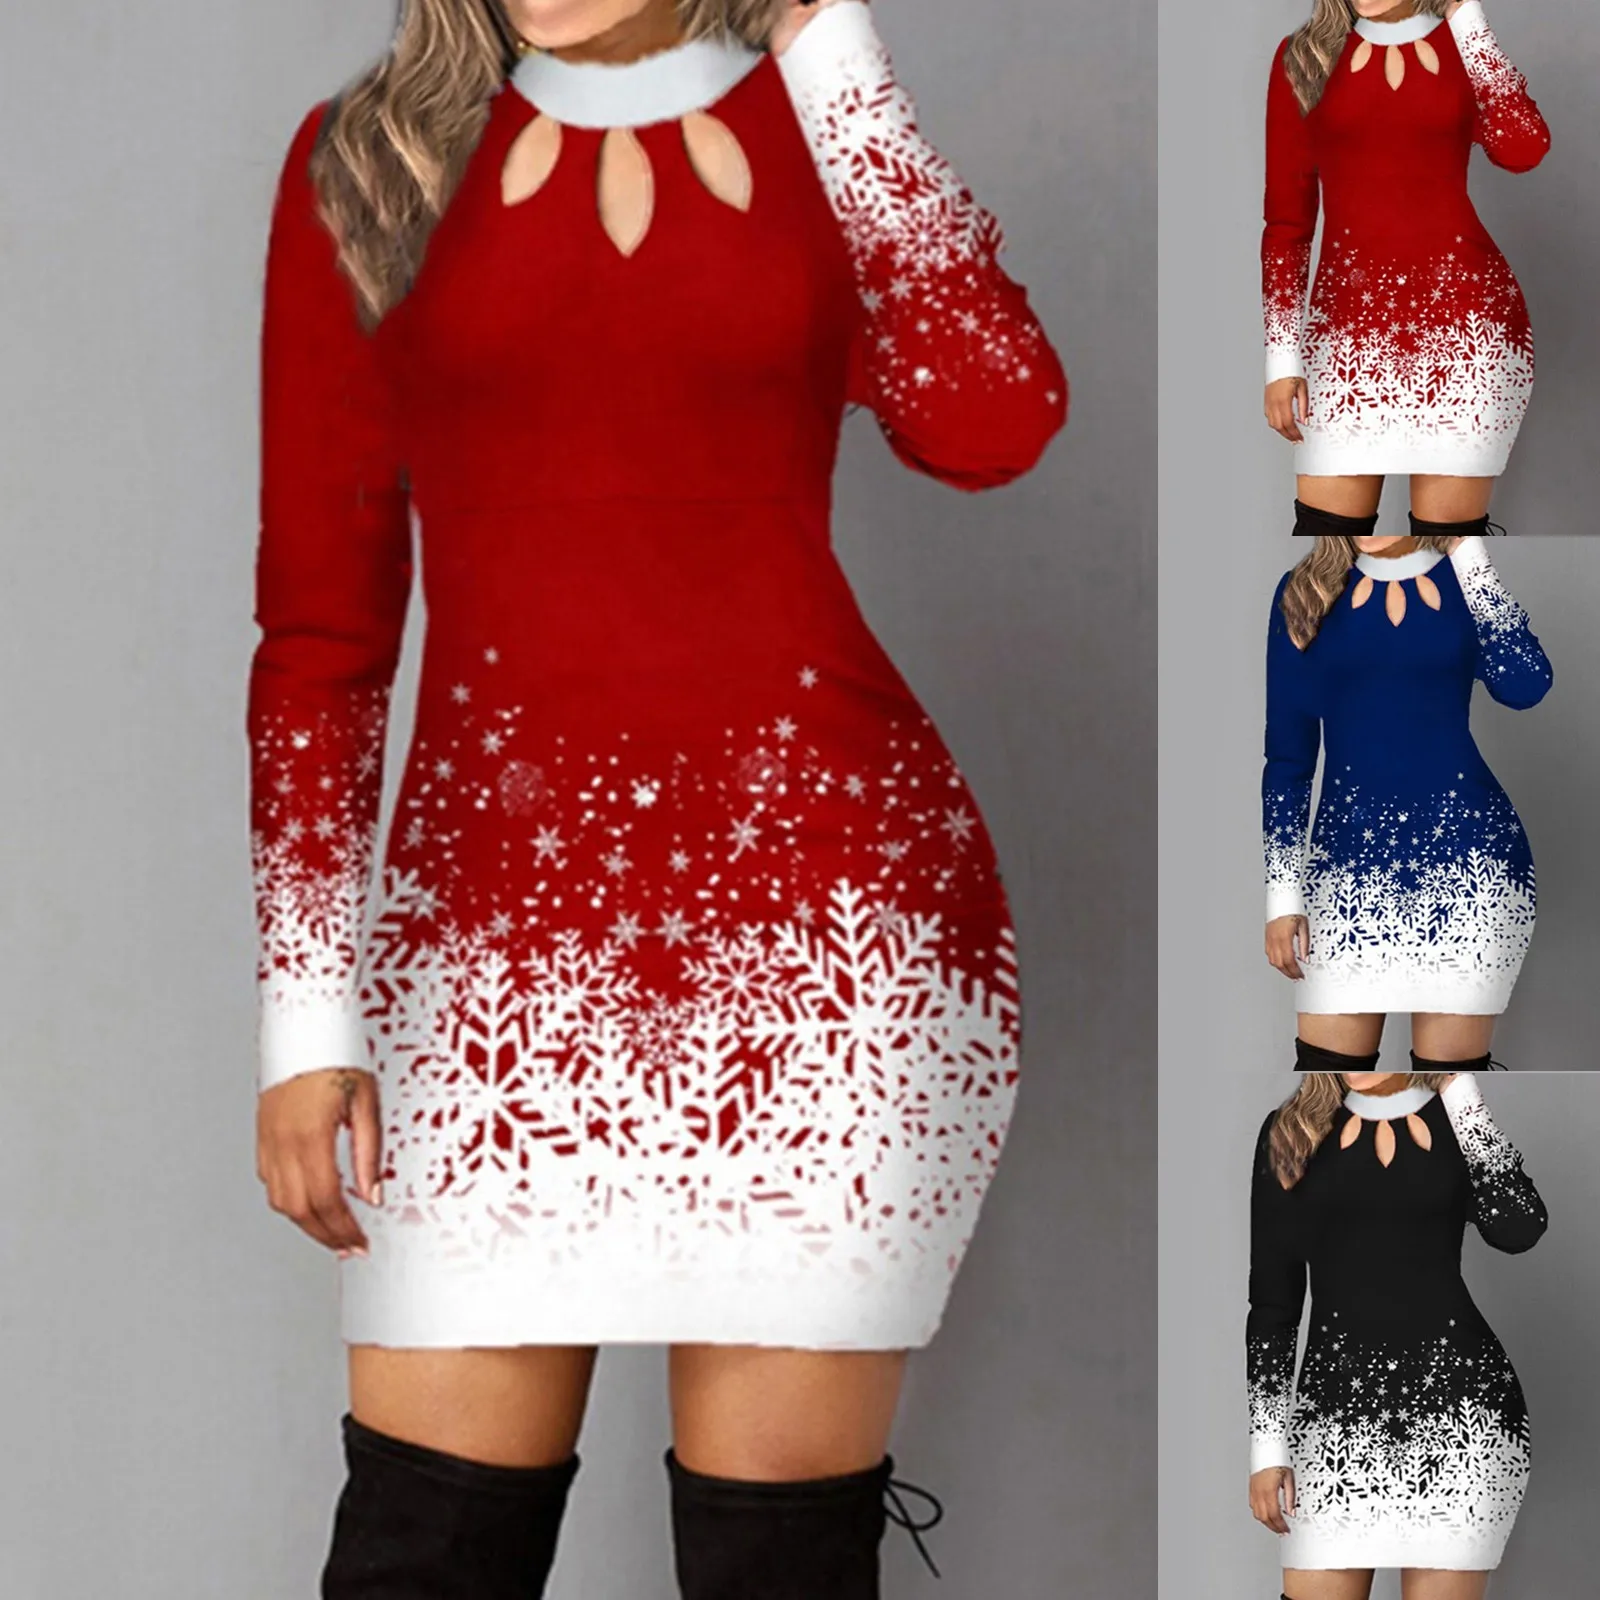 

New Women Kintted Dress Sexy Hollow out Winter Christmas Snowflake Party Slim Mini Dress Fashion Elegant Female Sweater Dress